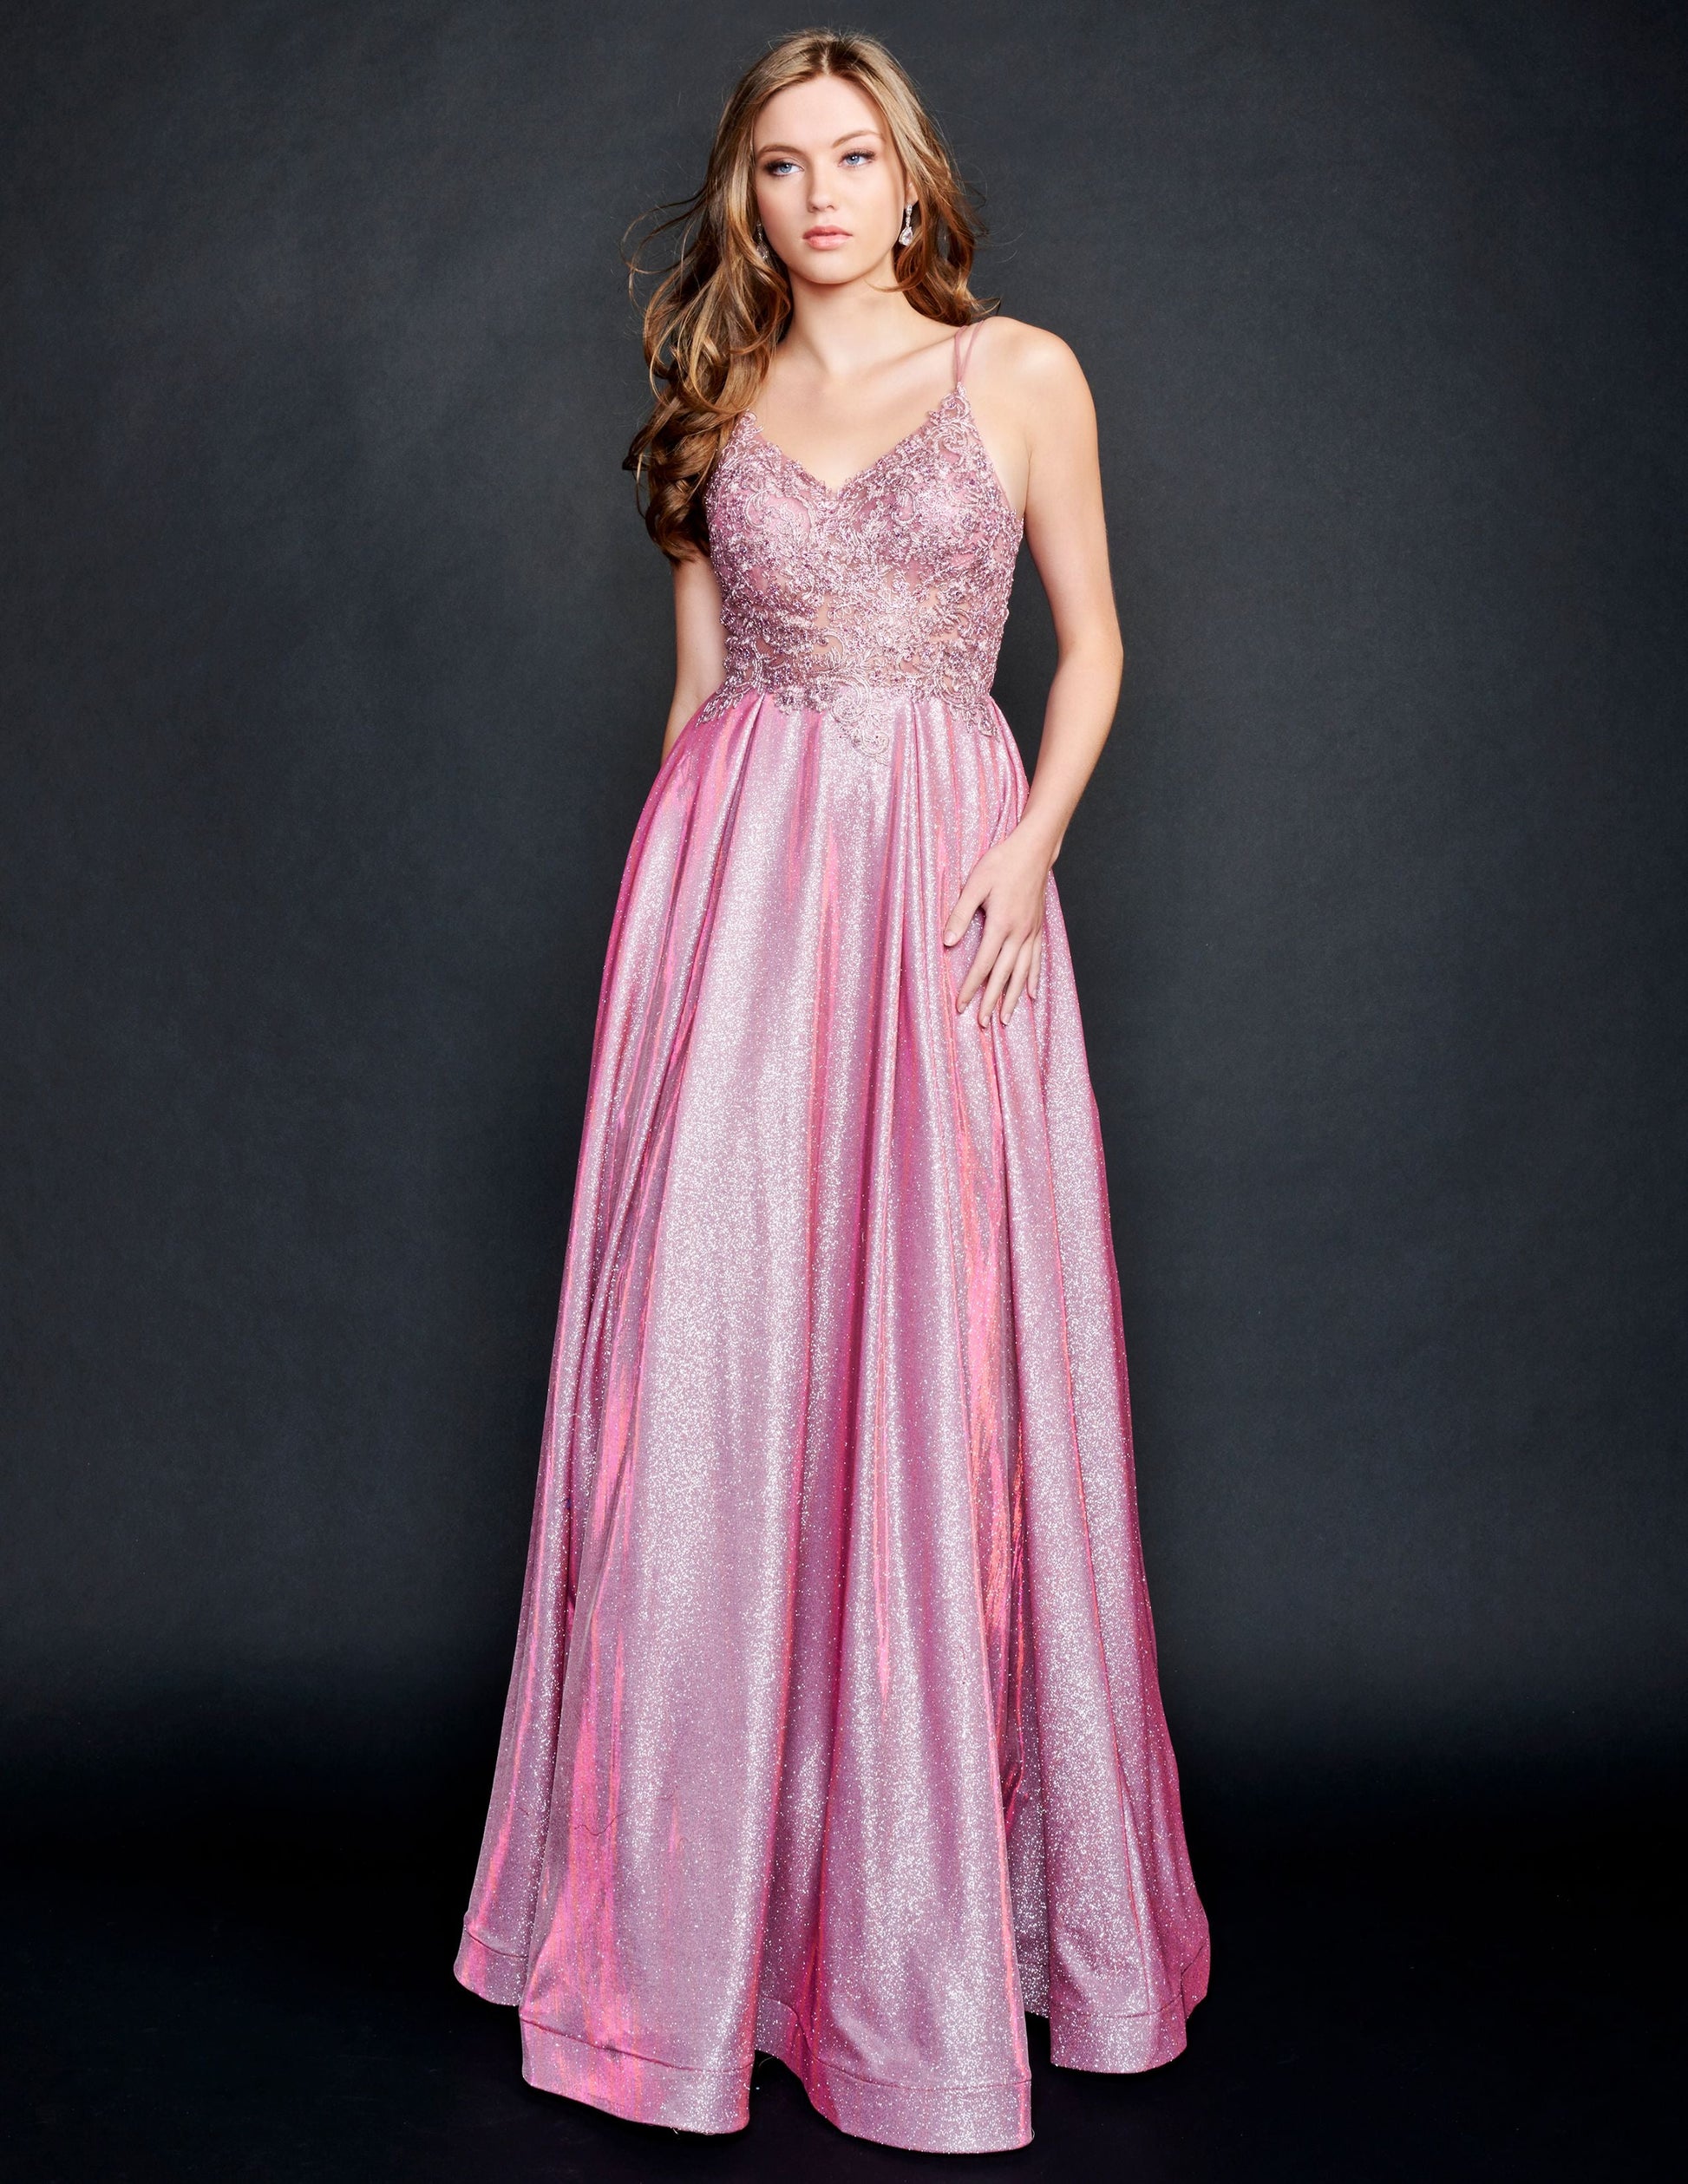 Nina Canacci 3186 Long Shimmer Sheer Lace Ballgown Prom Dress Pageant Gown  Available Size- 0-18  Available Color- Mauve, Red